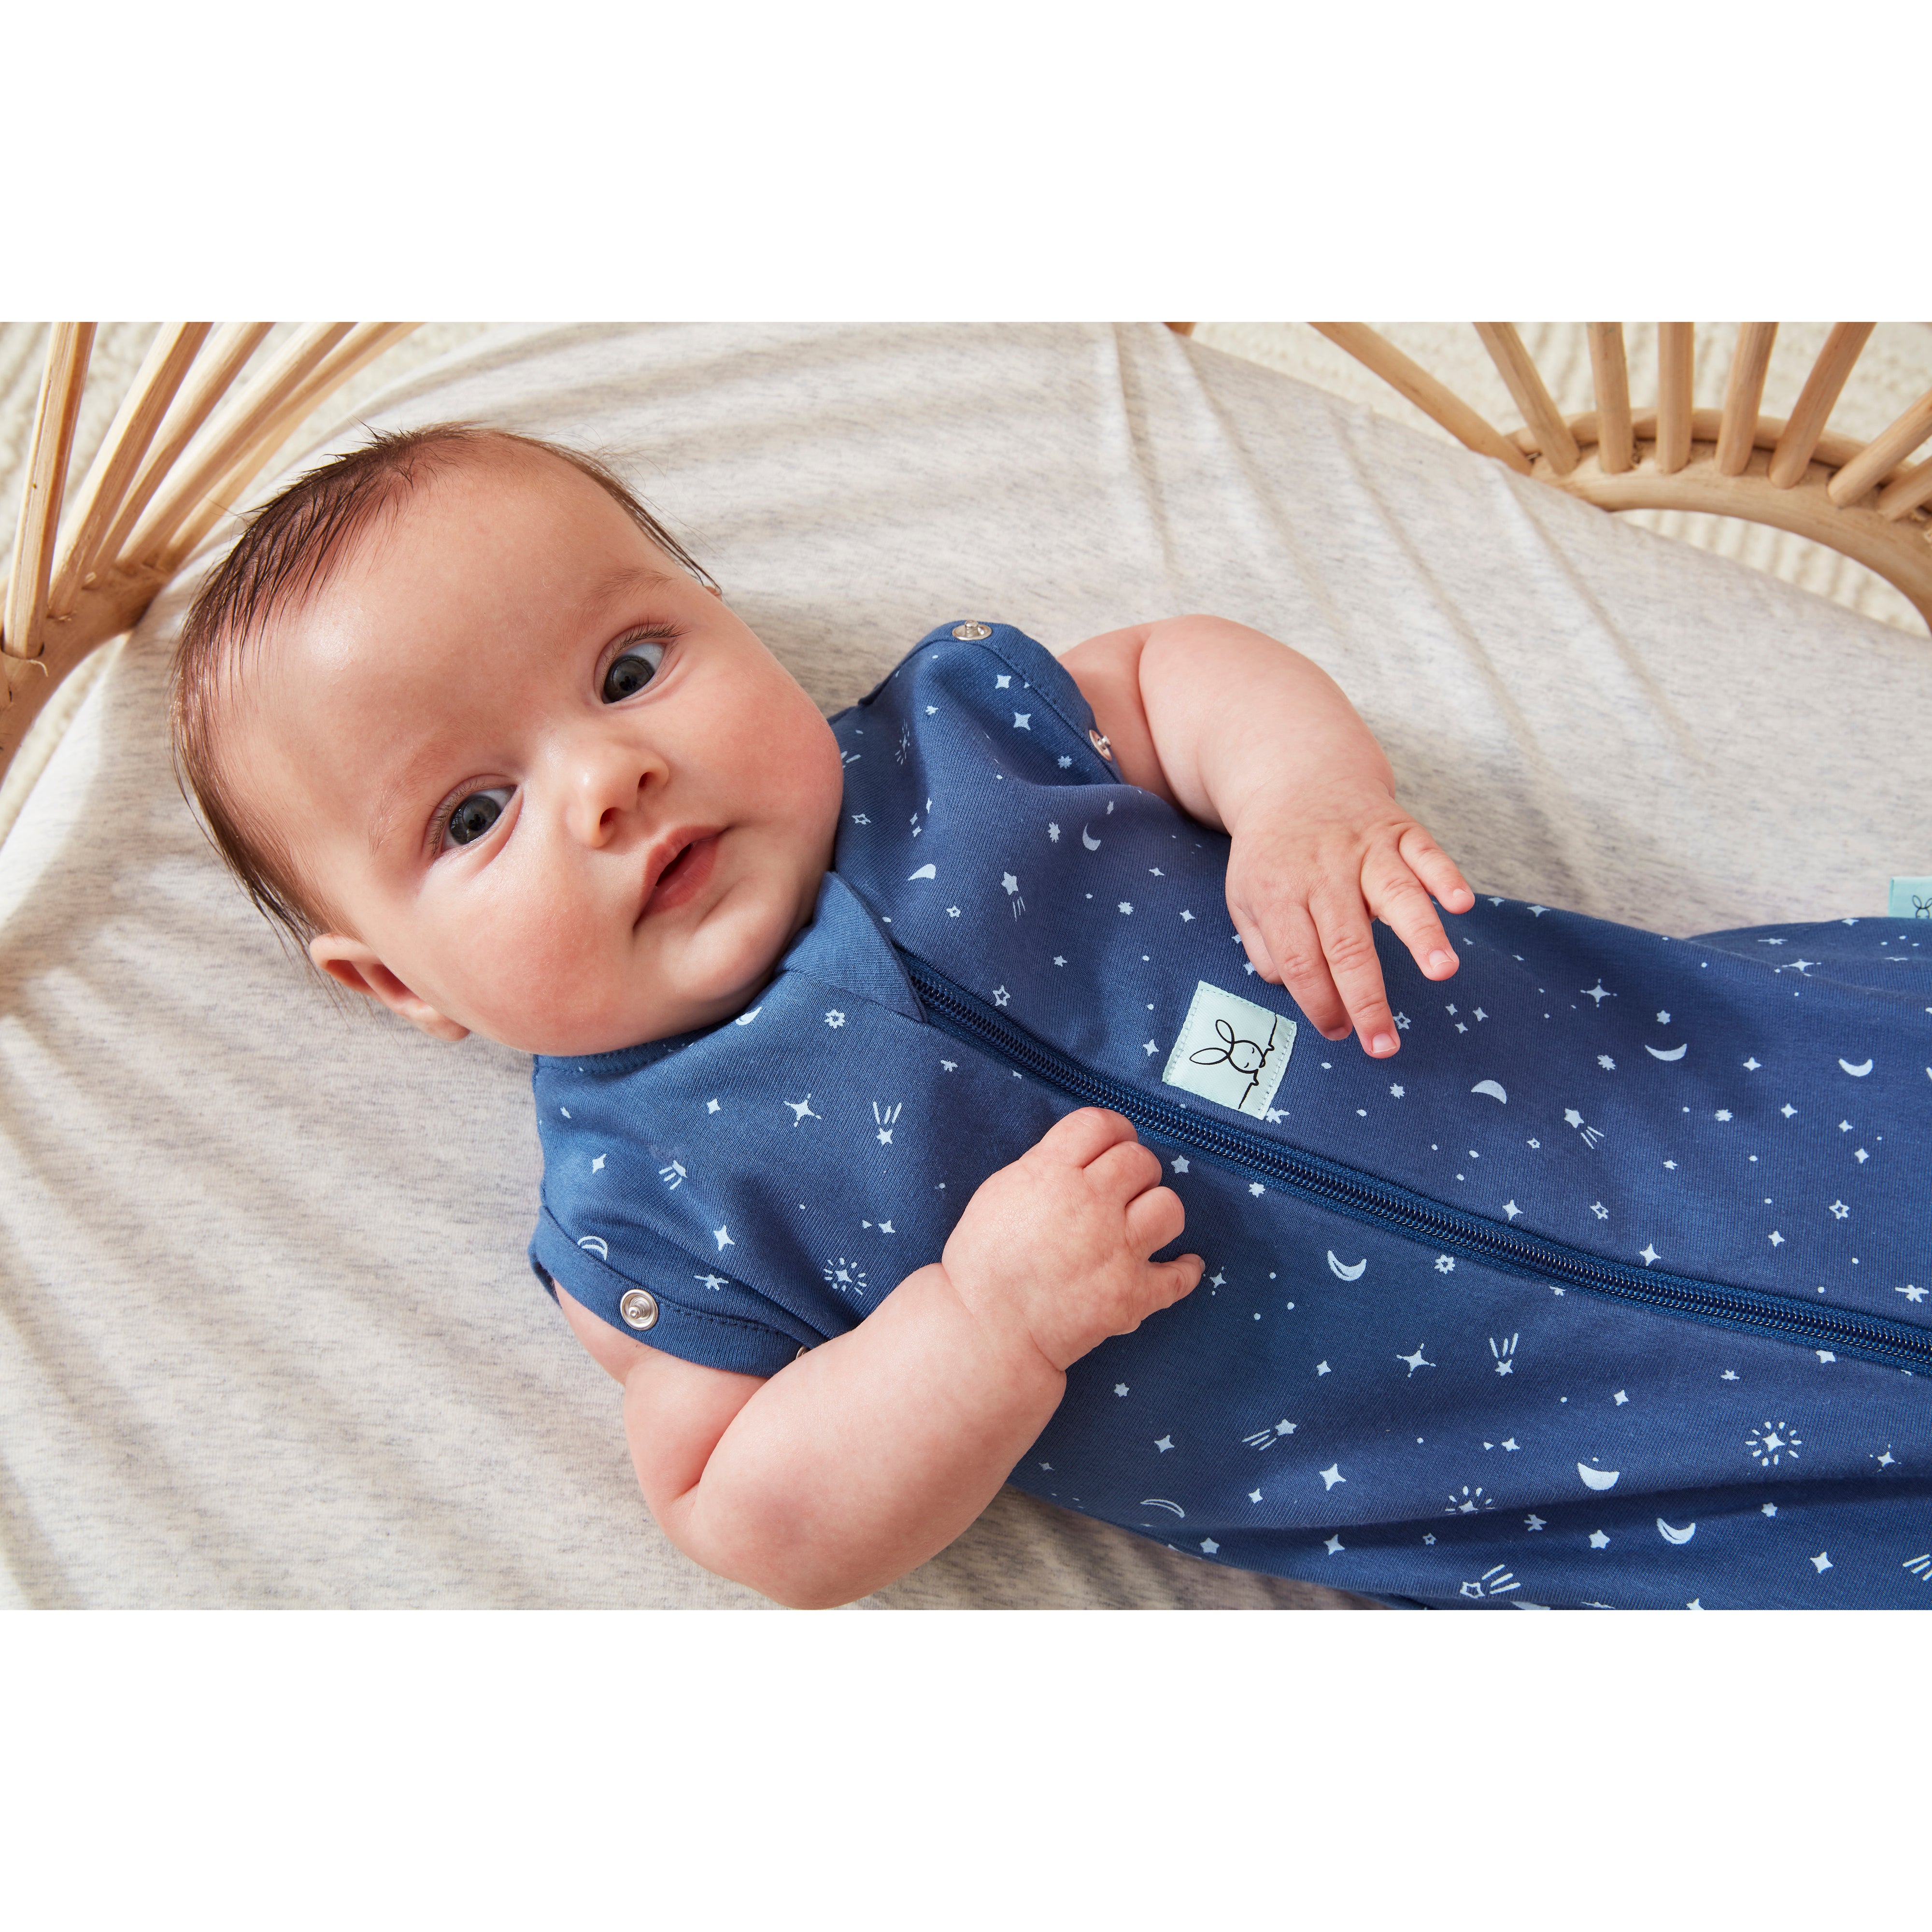 ergopouch-cocoon-swaddle-bag-1-0-tog-night-sky-ergo-zepco-1-0t03-06mns20- (13)